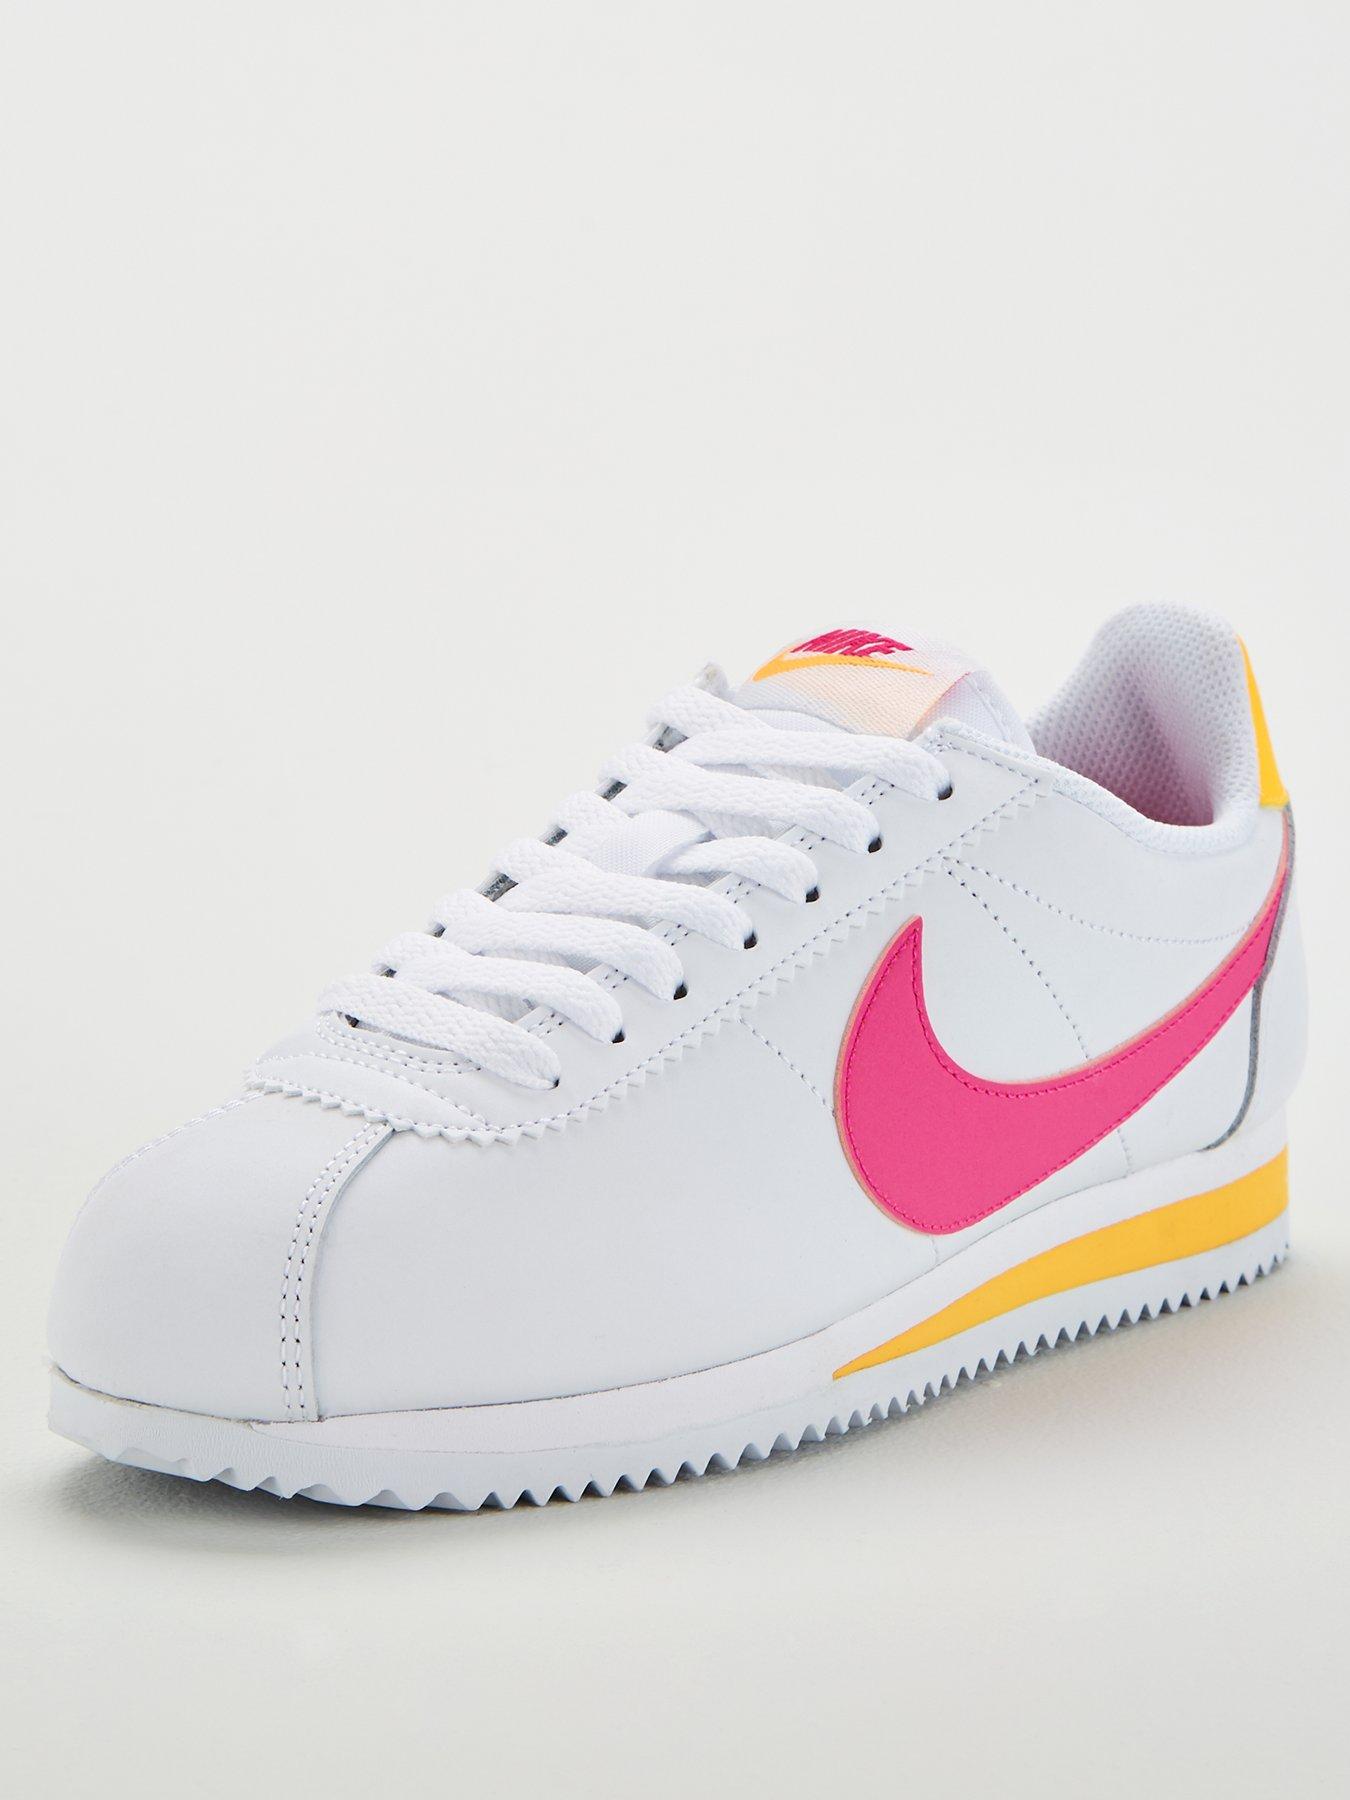 pink and yellow cortez